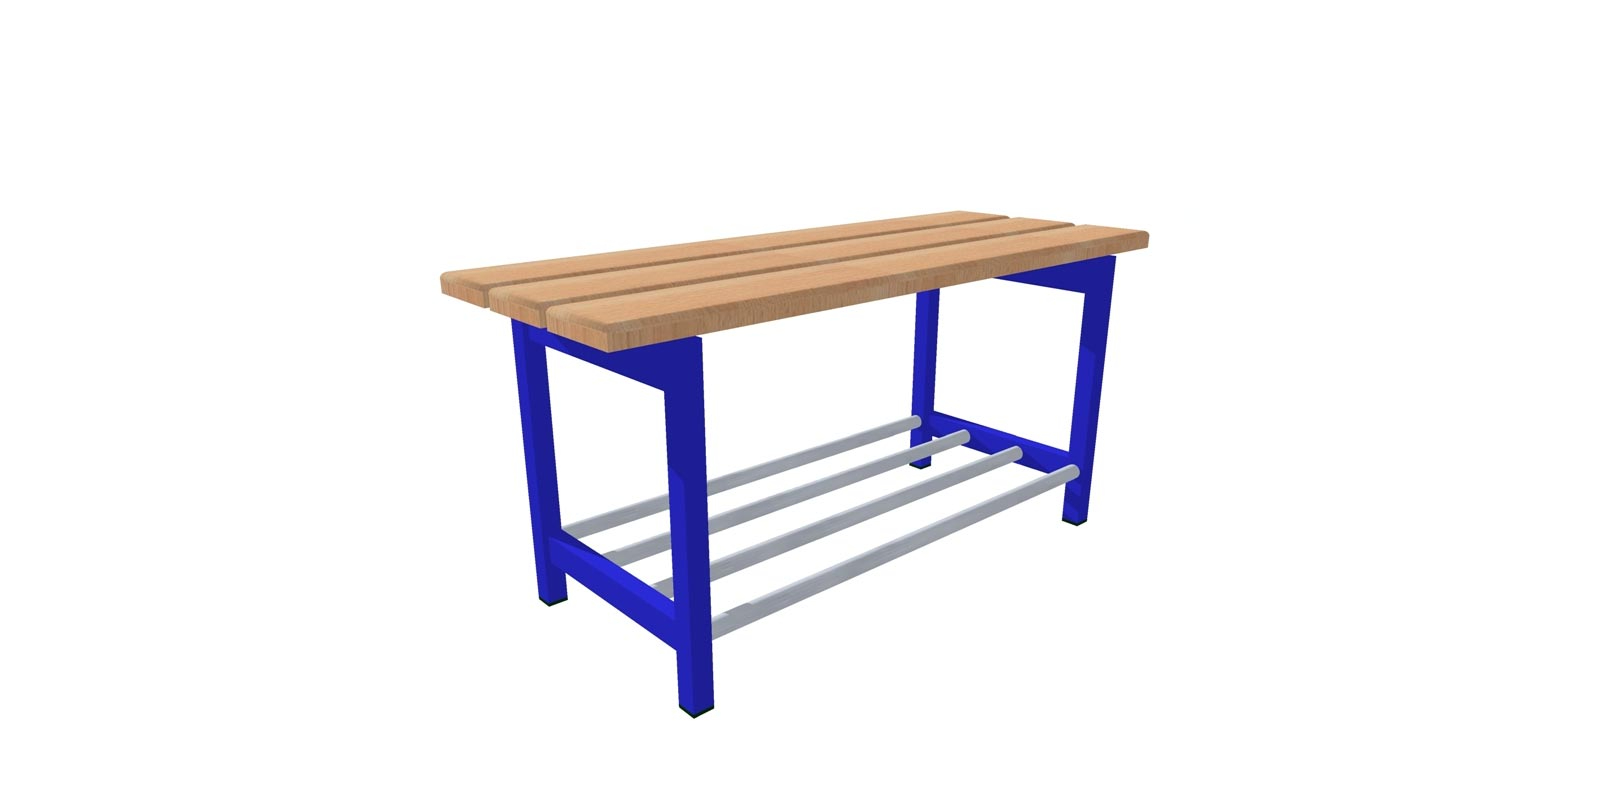 Freestanding bench with three bench slats and shoe tray bag tray - WHBA08